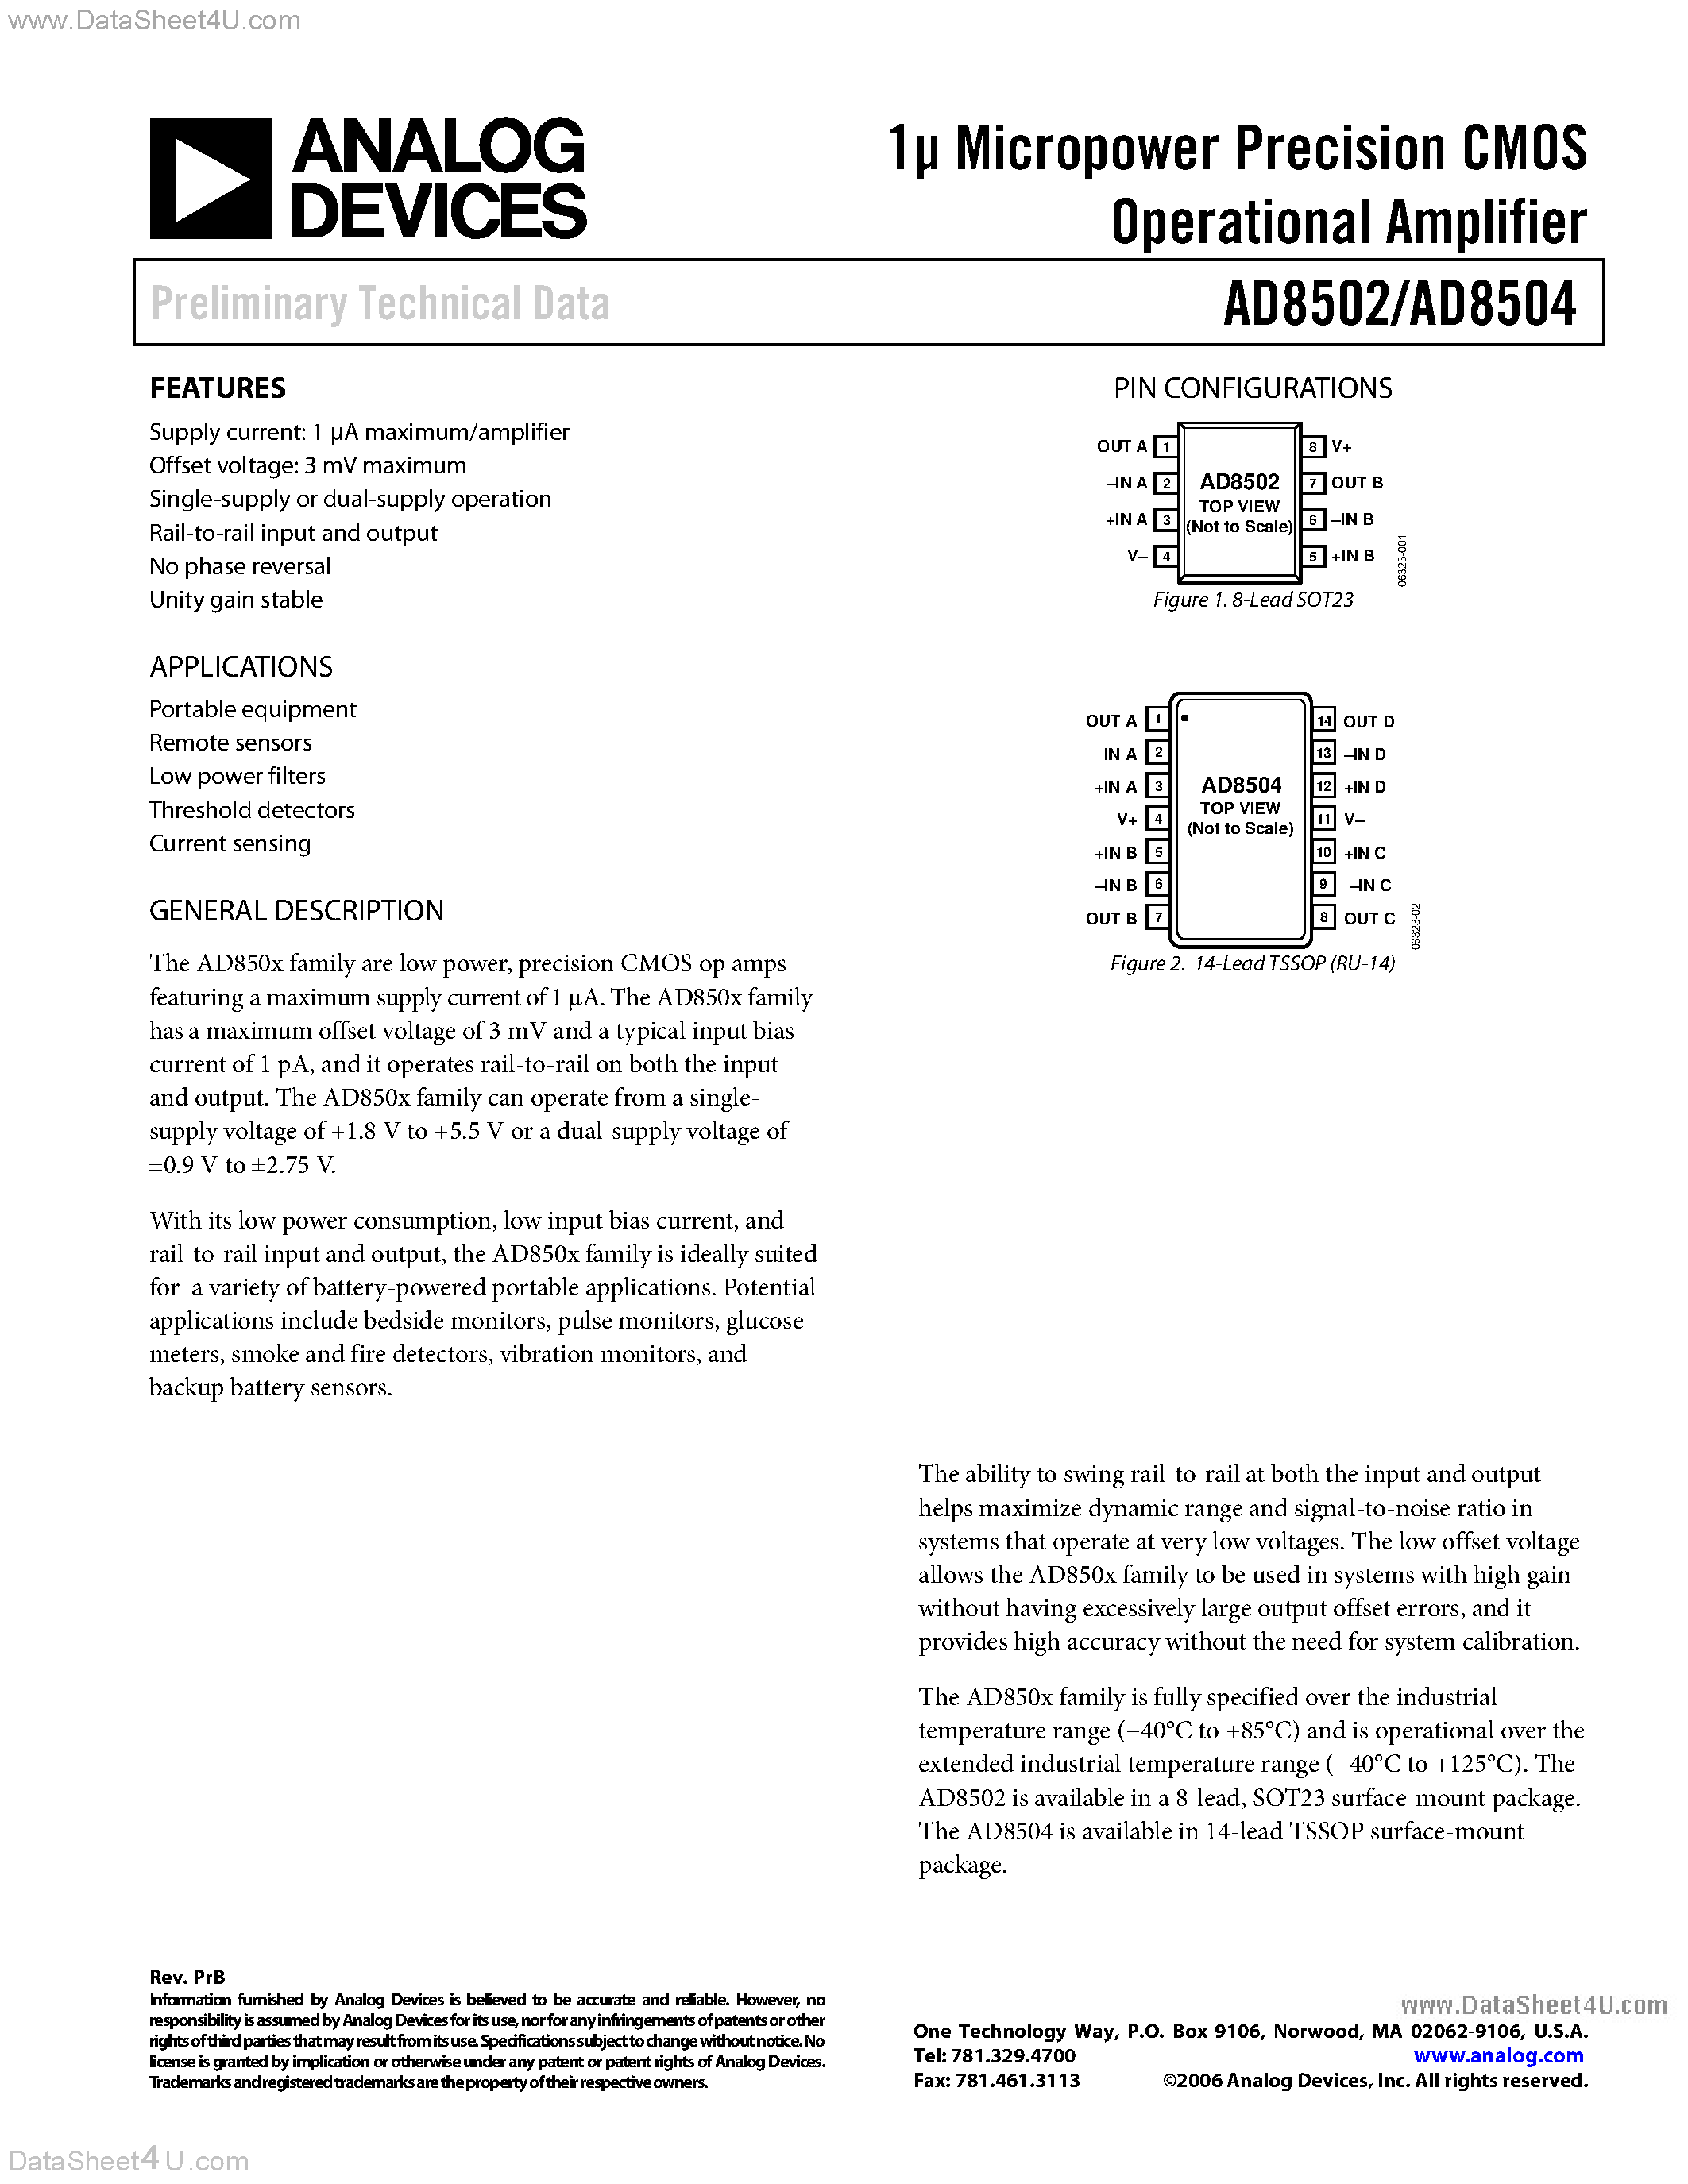 Datasheet AD8504 - (AD8502 / AD8504) Micropower Precision CMOS Operational Amplifier page 1